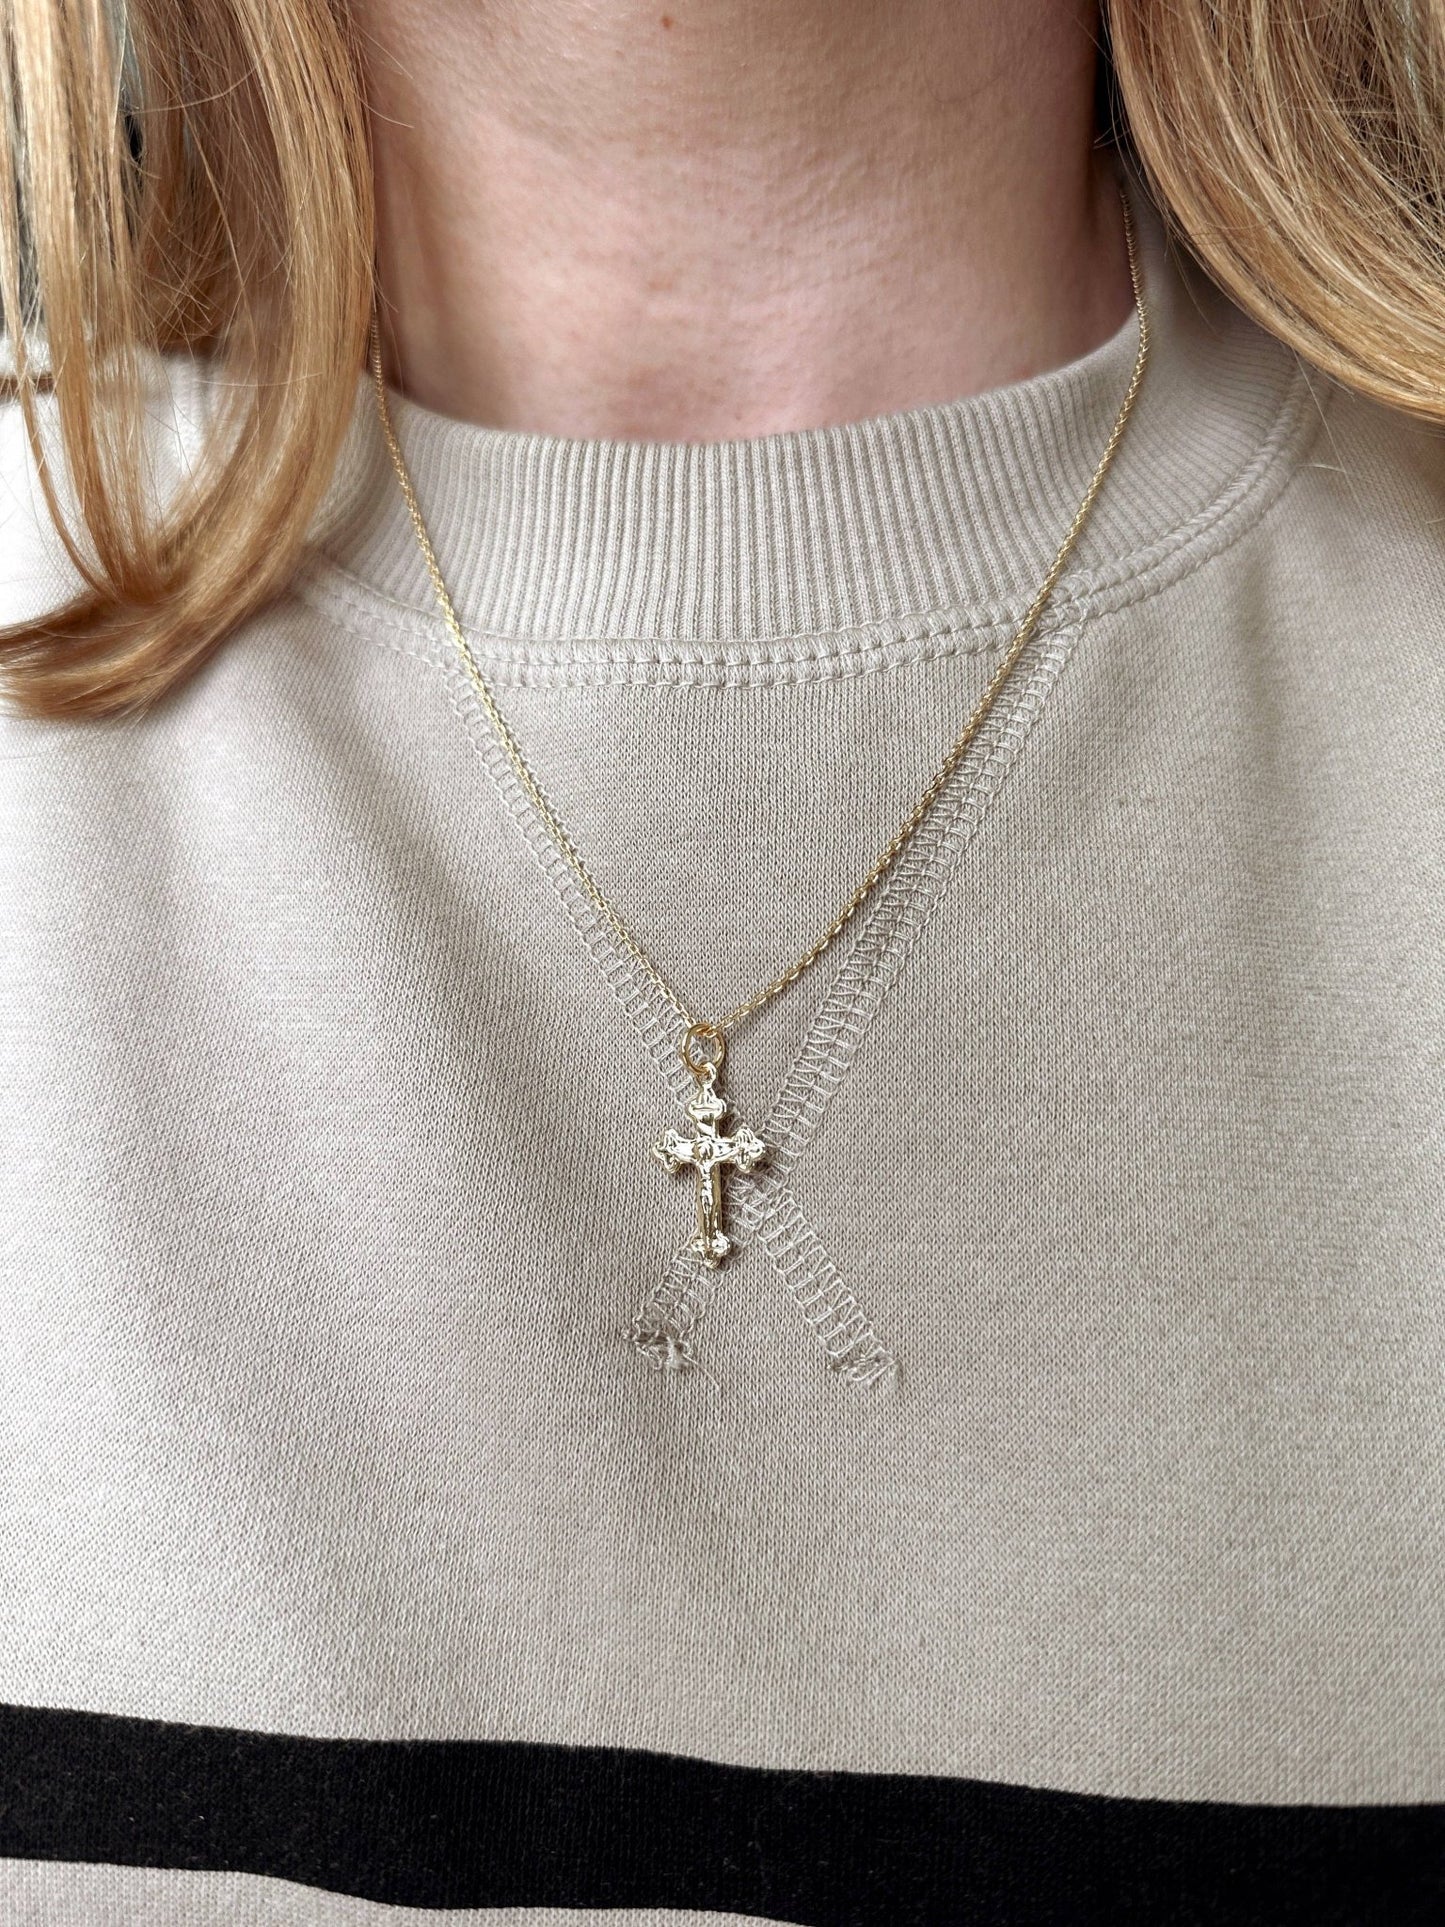 18k Gold Filled Delicate Crucifix Pendant - FOREVERLINKX